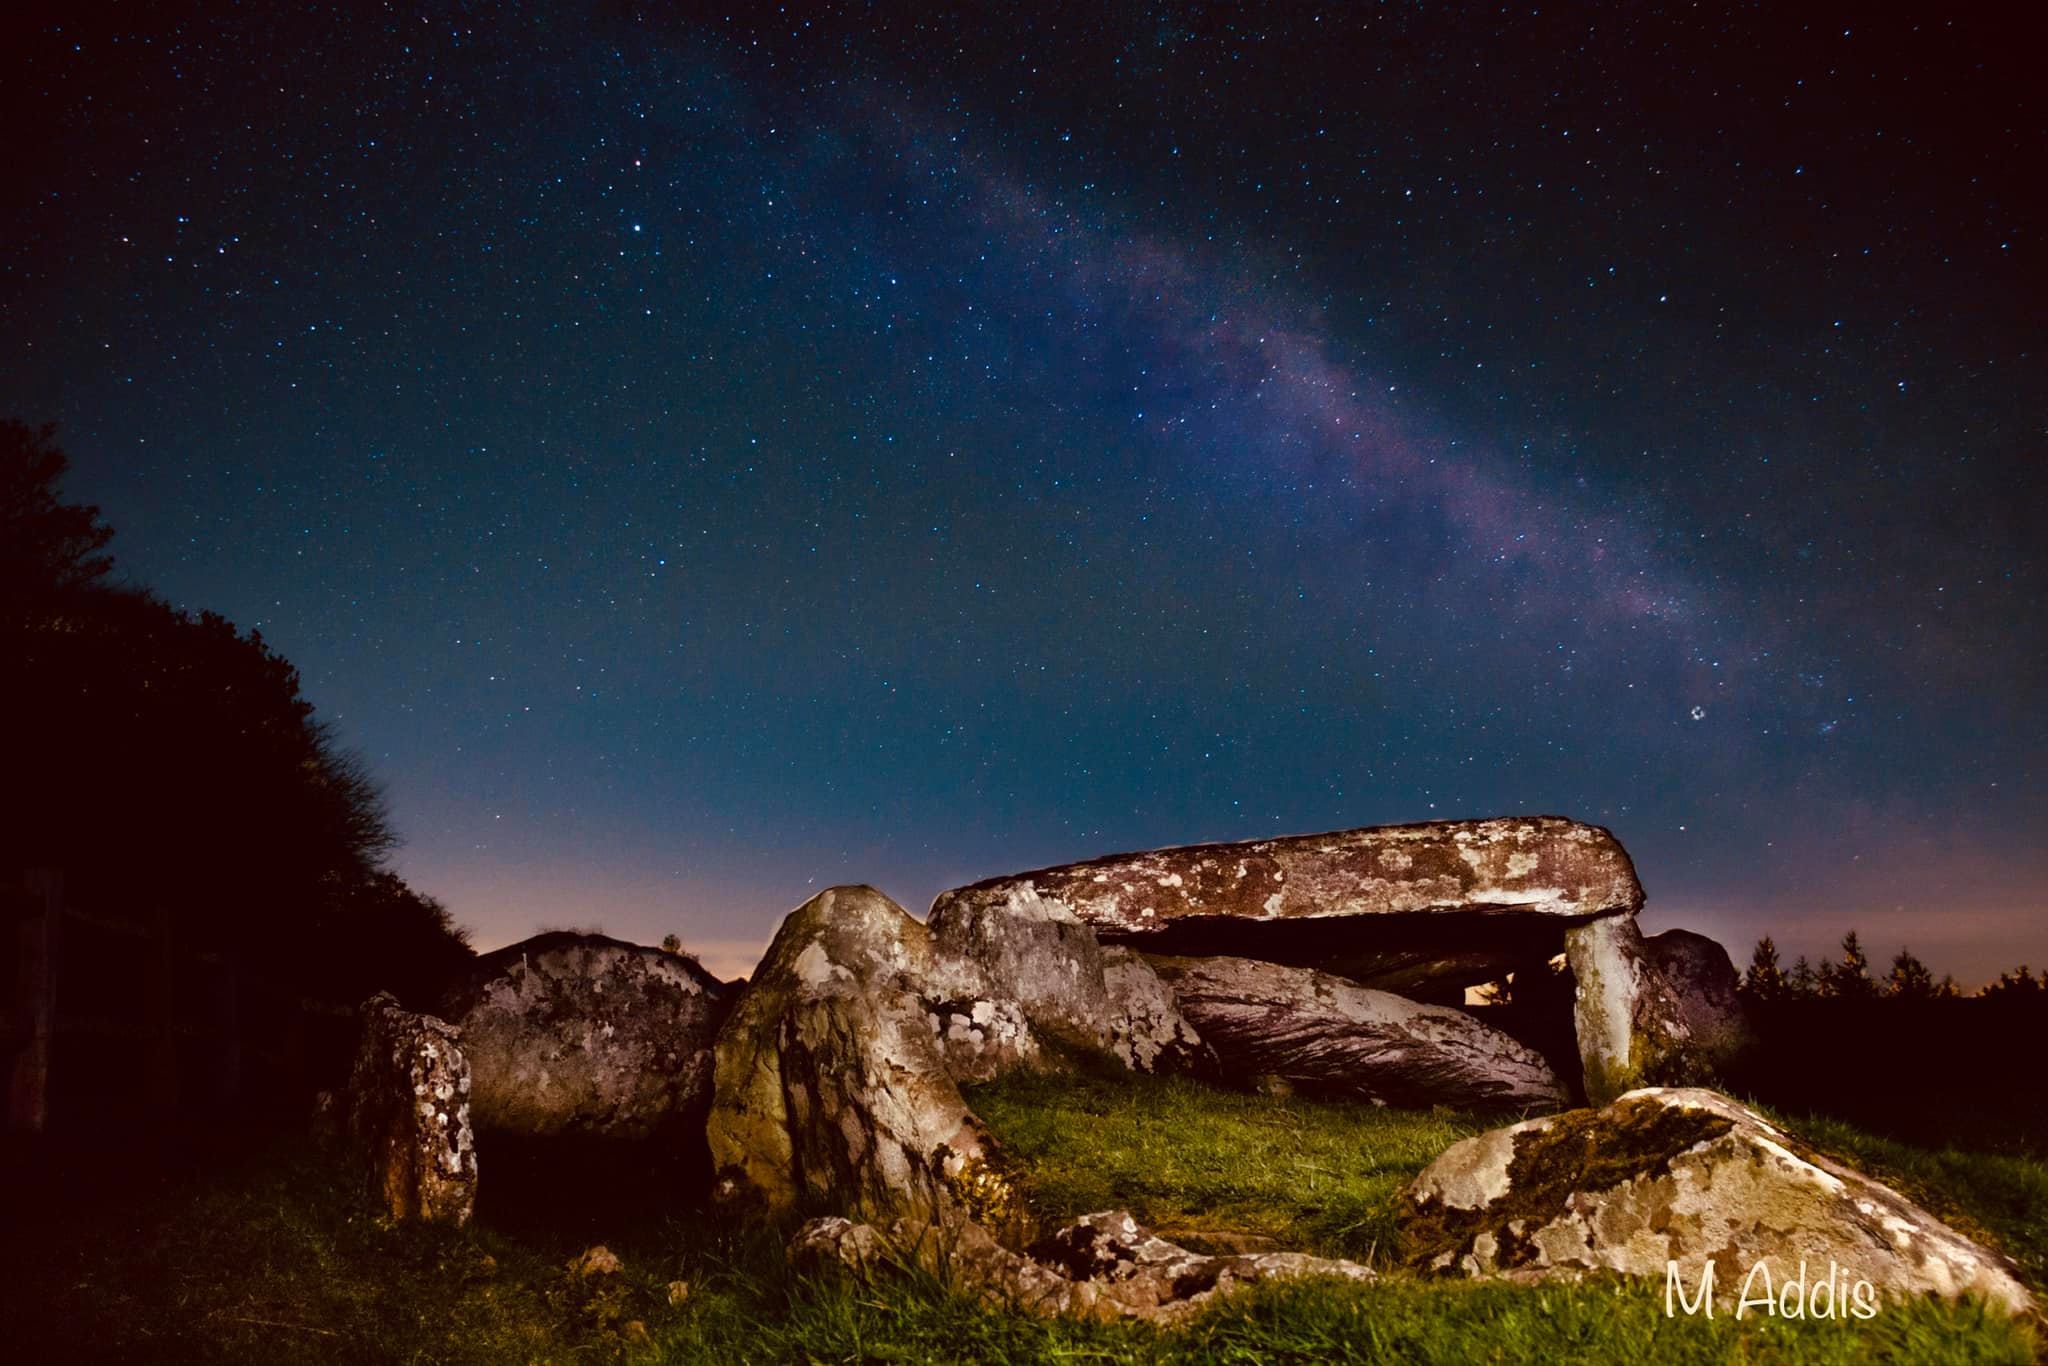  The night sky and Milkway above Arthurs Stone, near Dorstone in the Golden Valley. Picture: Matt Addis/Hereford Times Camera Club